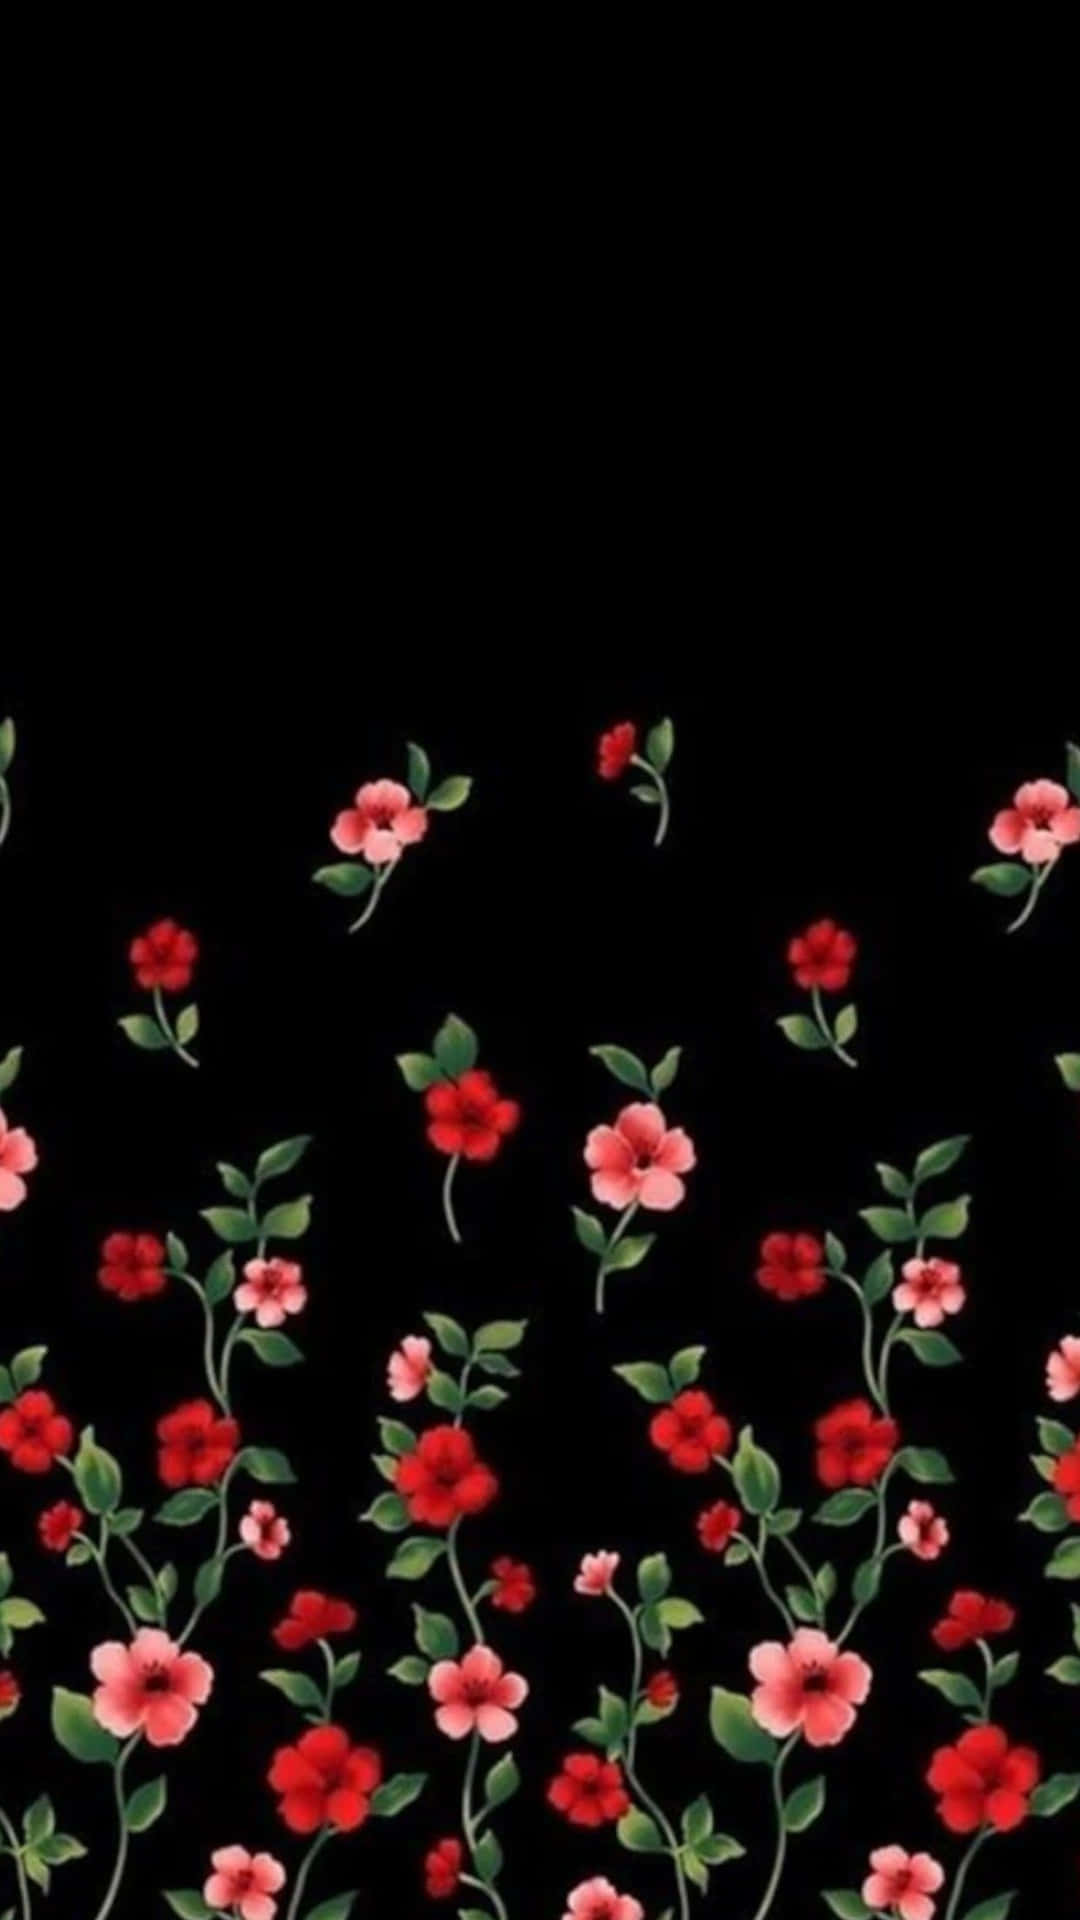 Brighten Up Any Room With a Black&Pink Floral Design Wallpaper